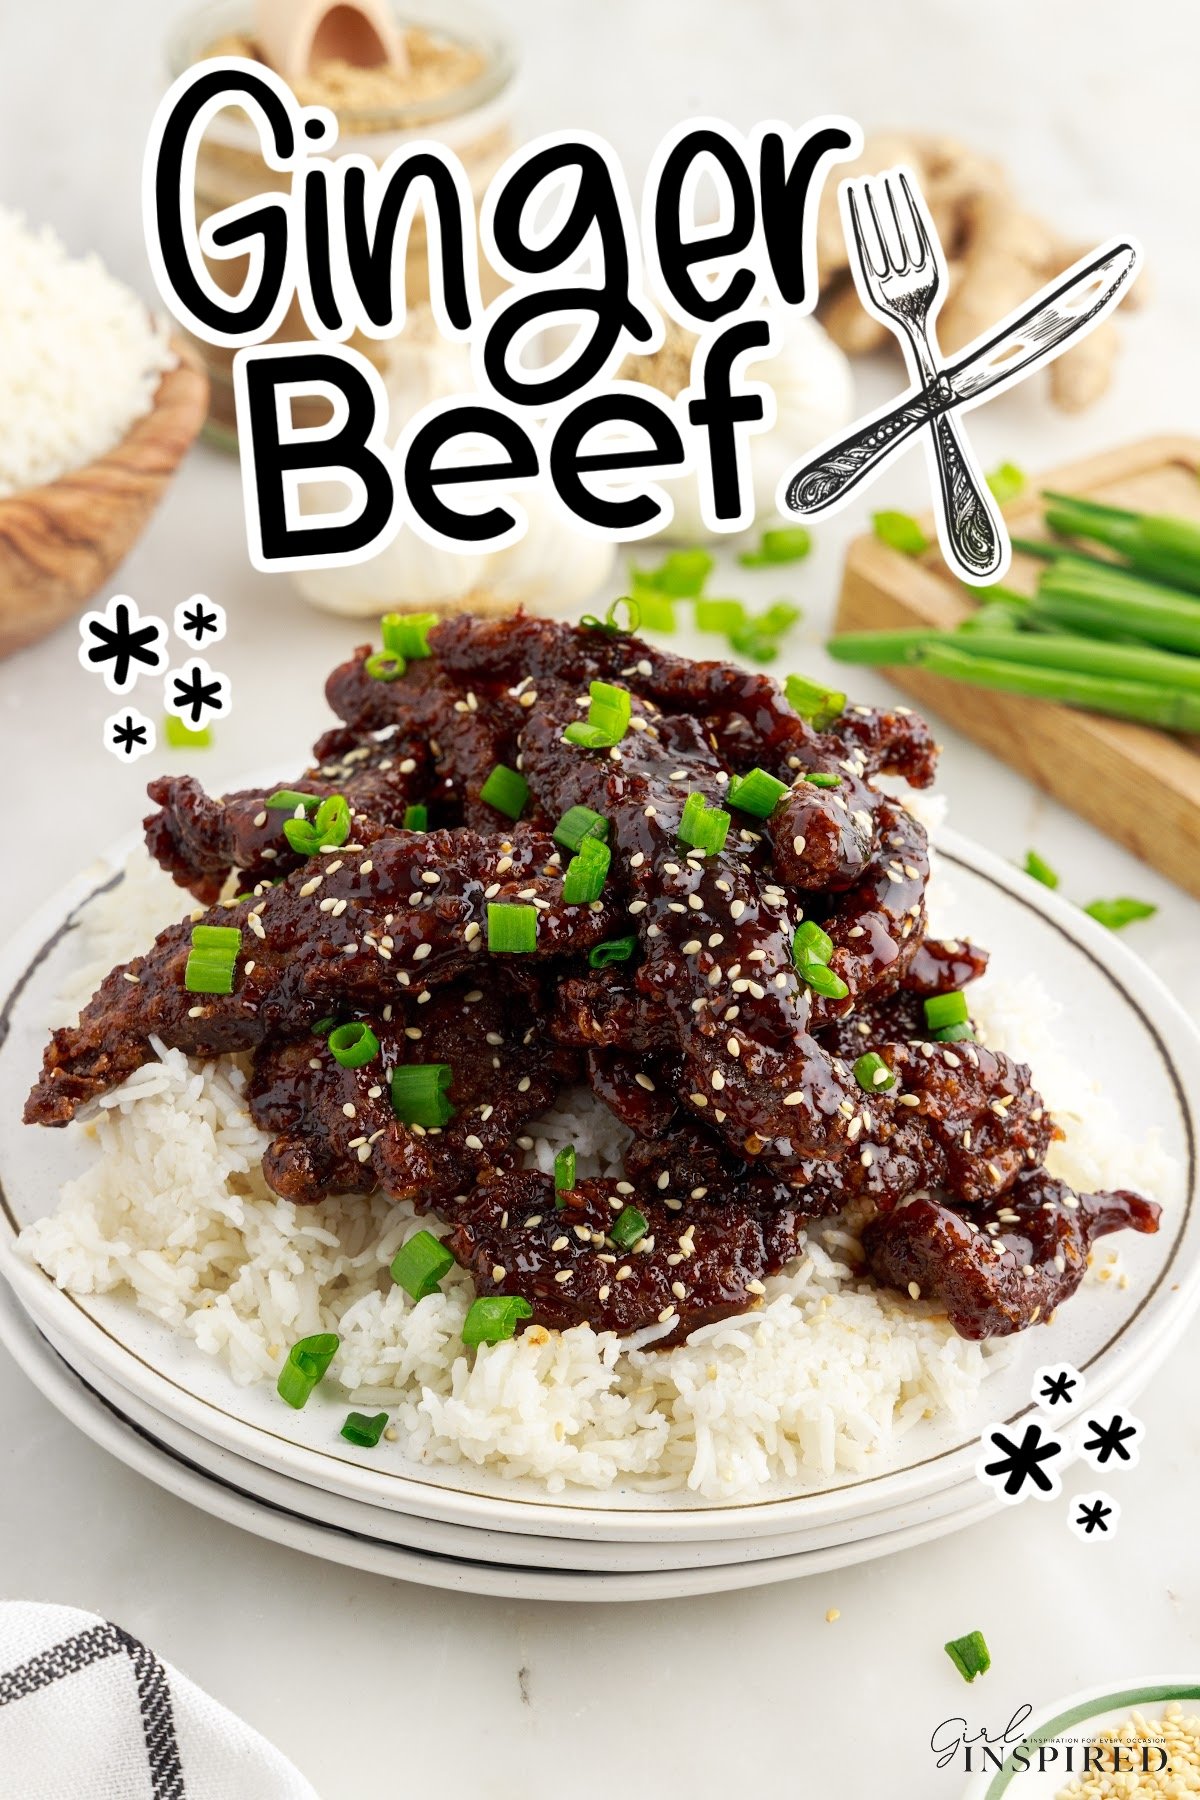 A plate of Ginger Beef over rice with text overlay.